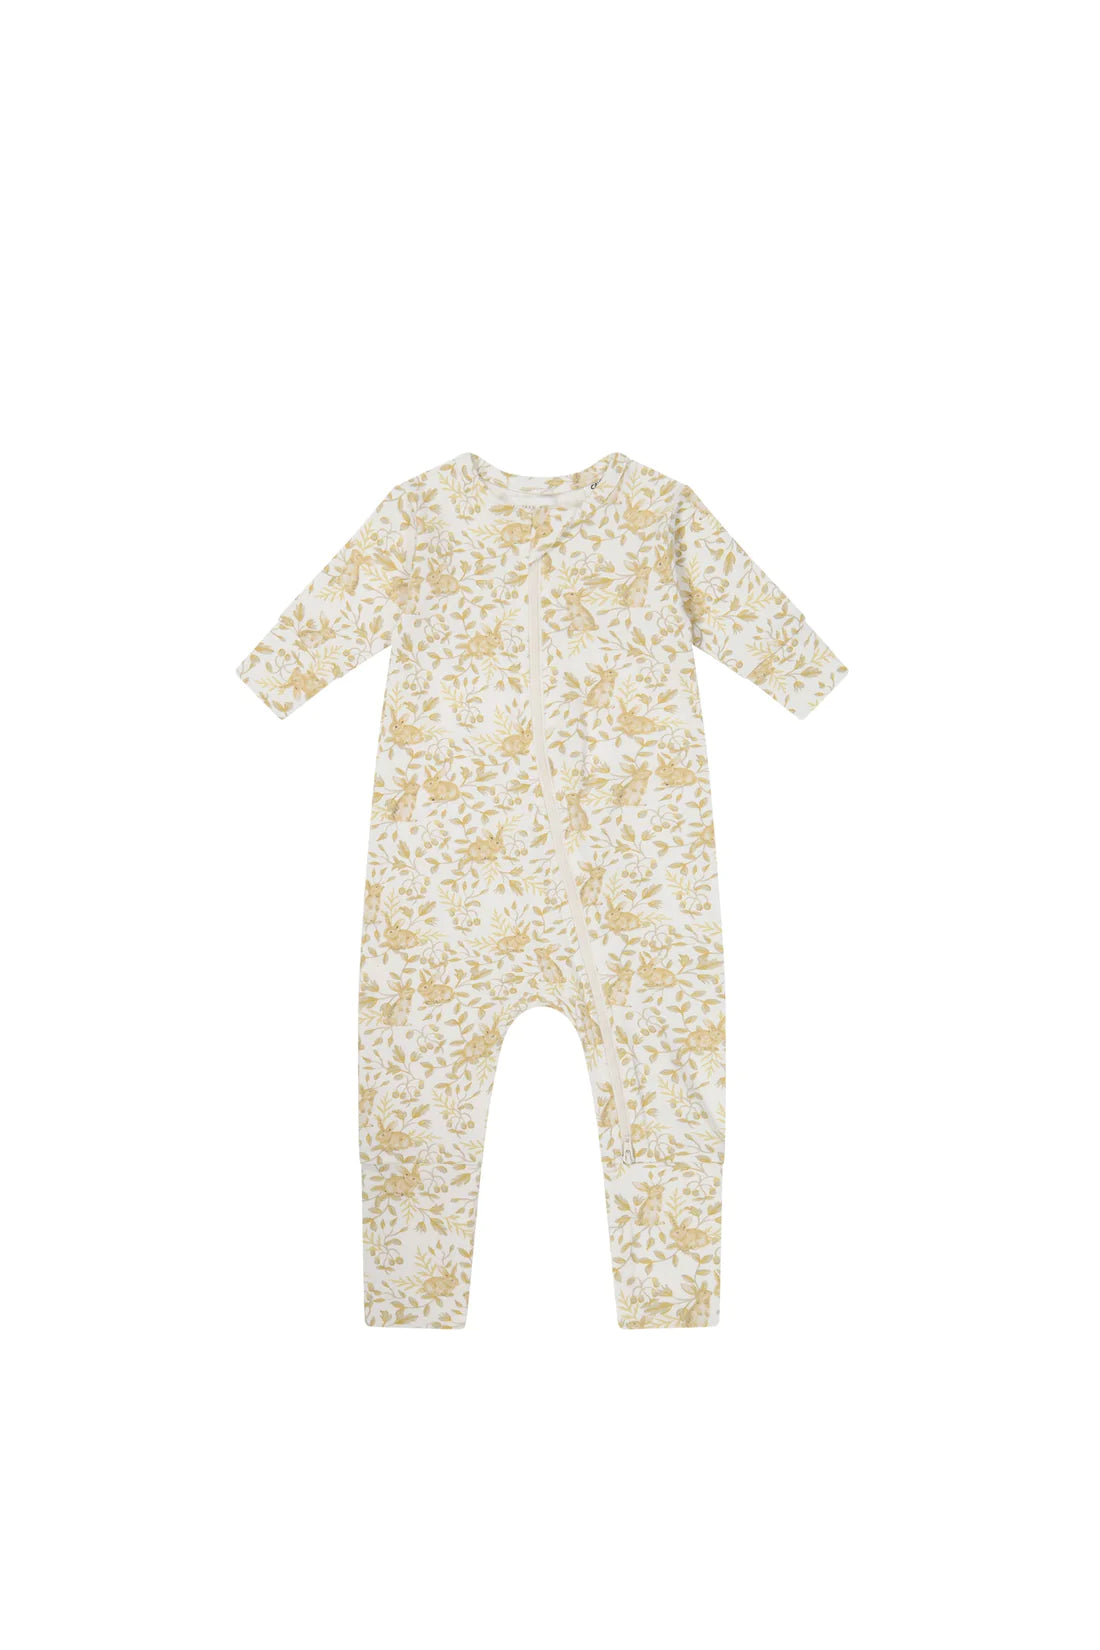 Jamie Kay Gracelyn Onepiece Bunnies Berry Field | Tiny Sprout